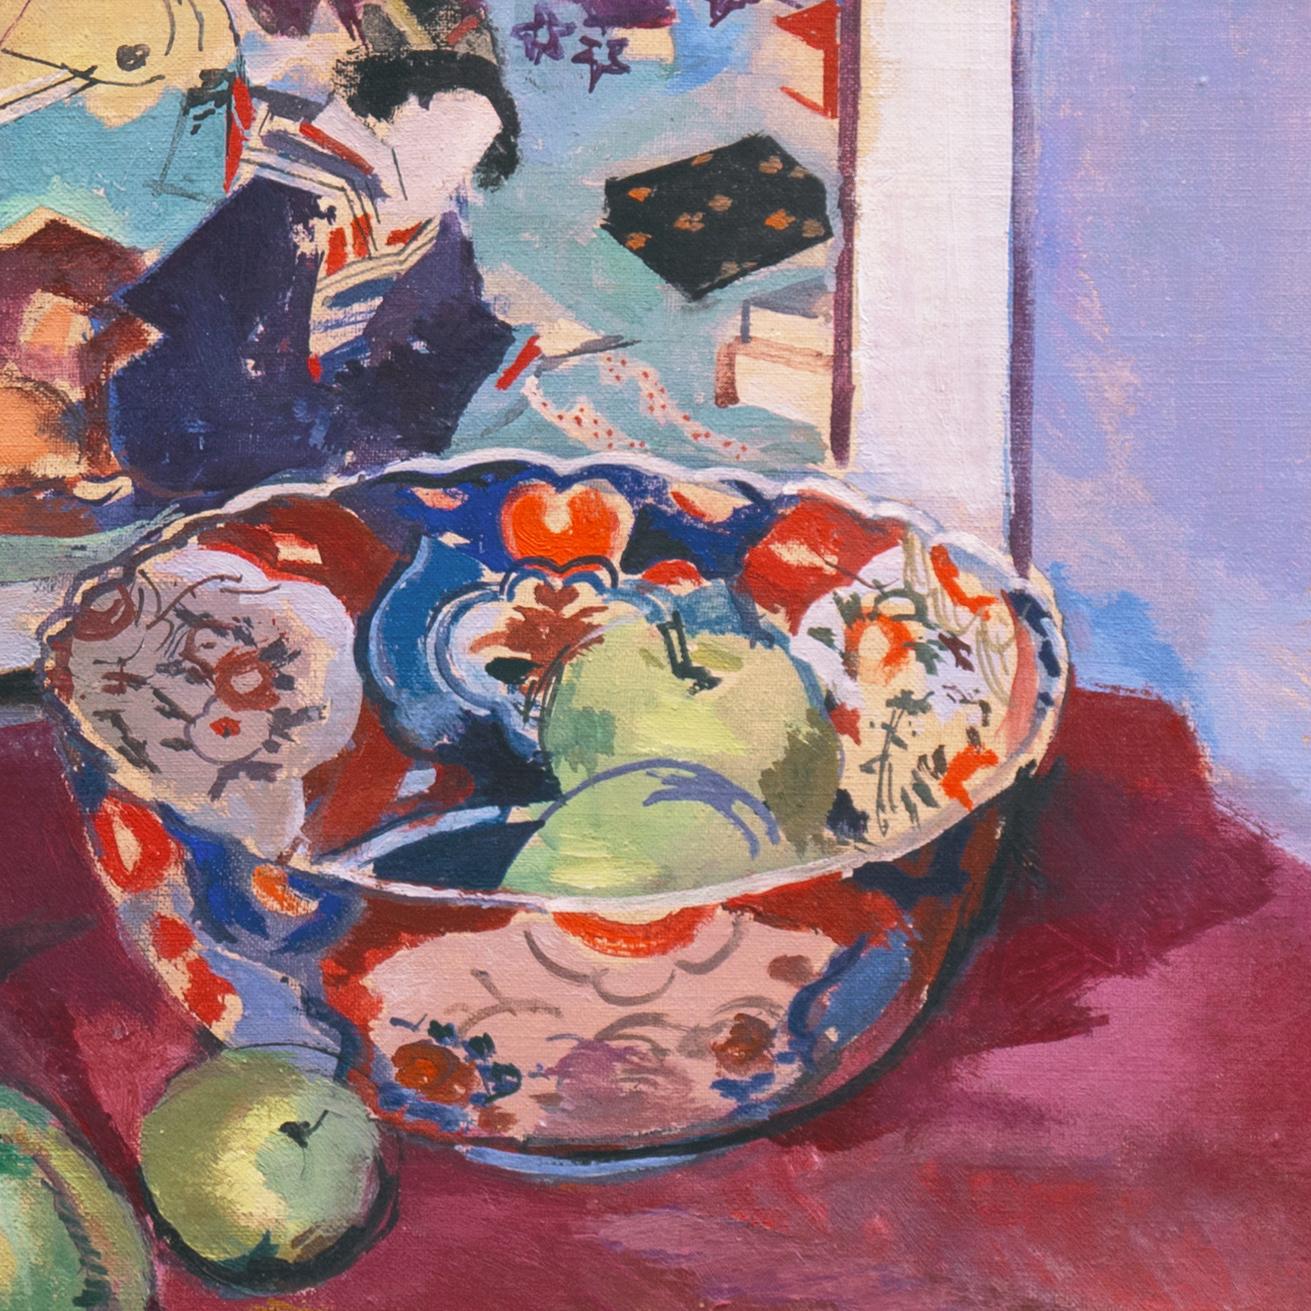 Signed lower right, 'V. Isbrand' for Victor Isbrand (Danish, 1897-1989) and painted circa 1945. 

A dramatic, Post-Impressionist still-life showing a group of items including a fluted, Japanese porcelain vase holding an informal arrangement of